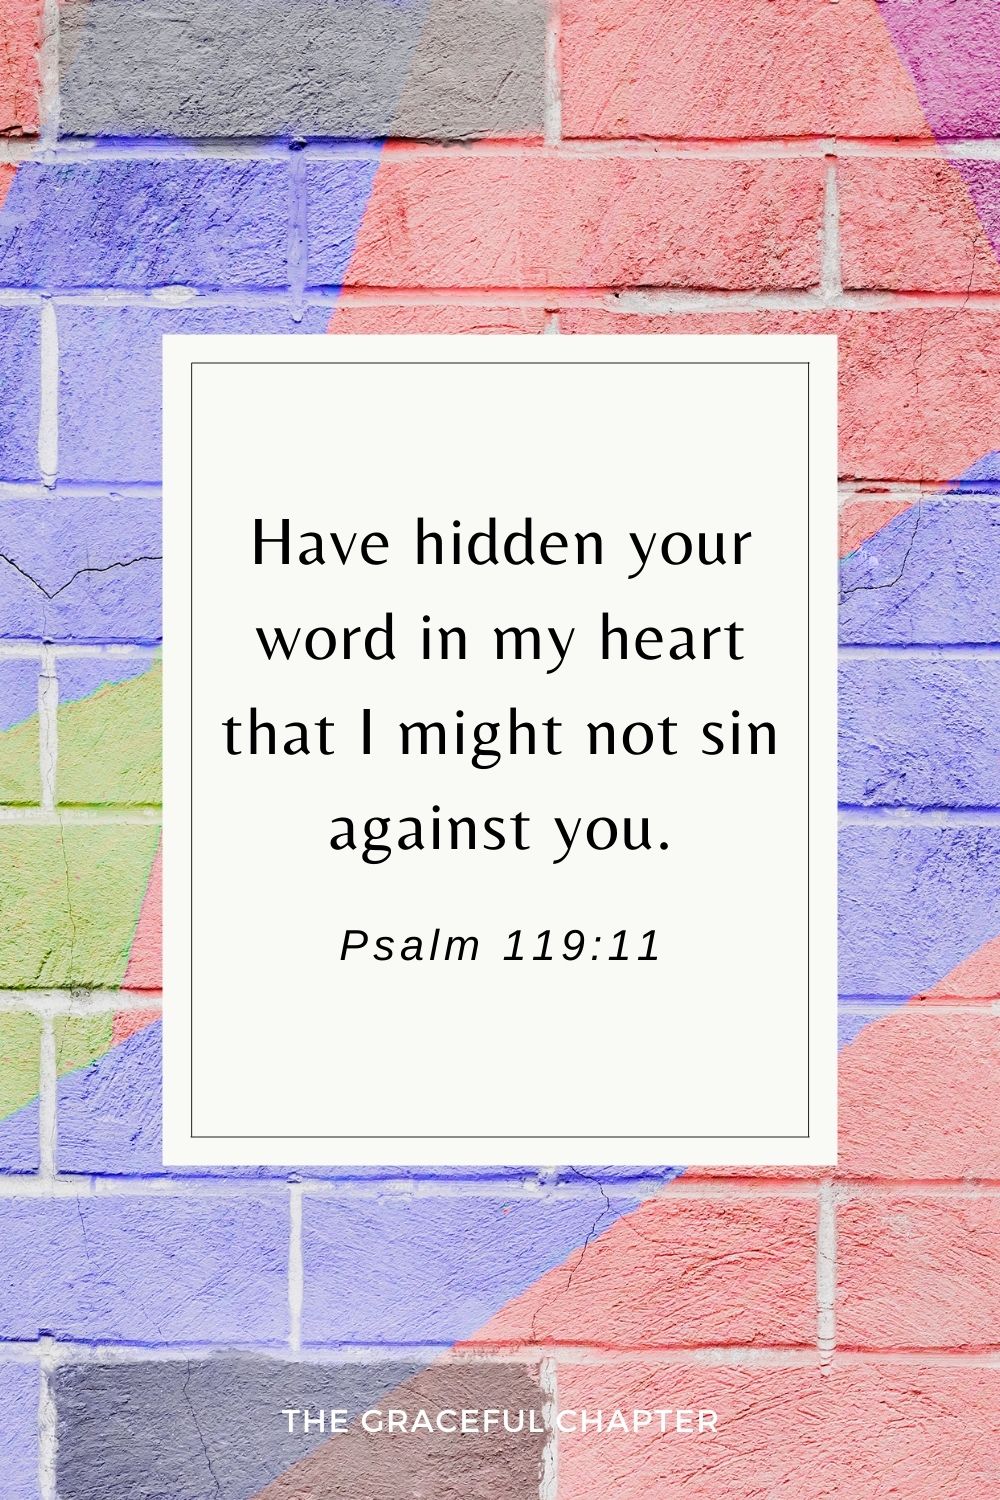 Have hidden your word in my heart that I might not sin against you. Psalm 119:11